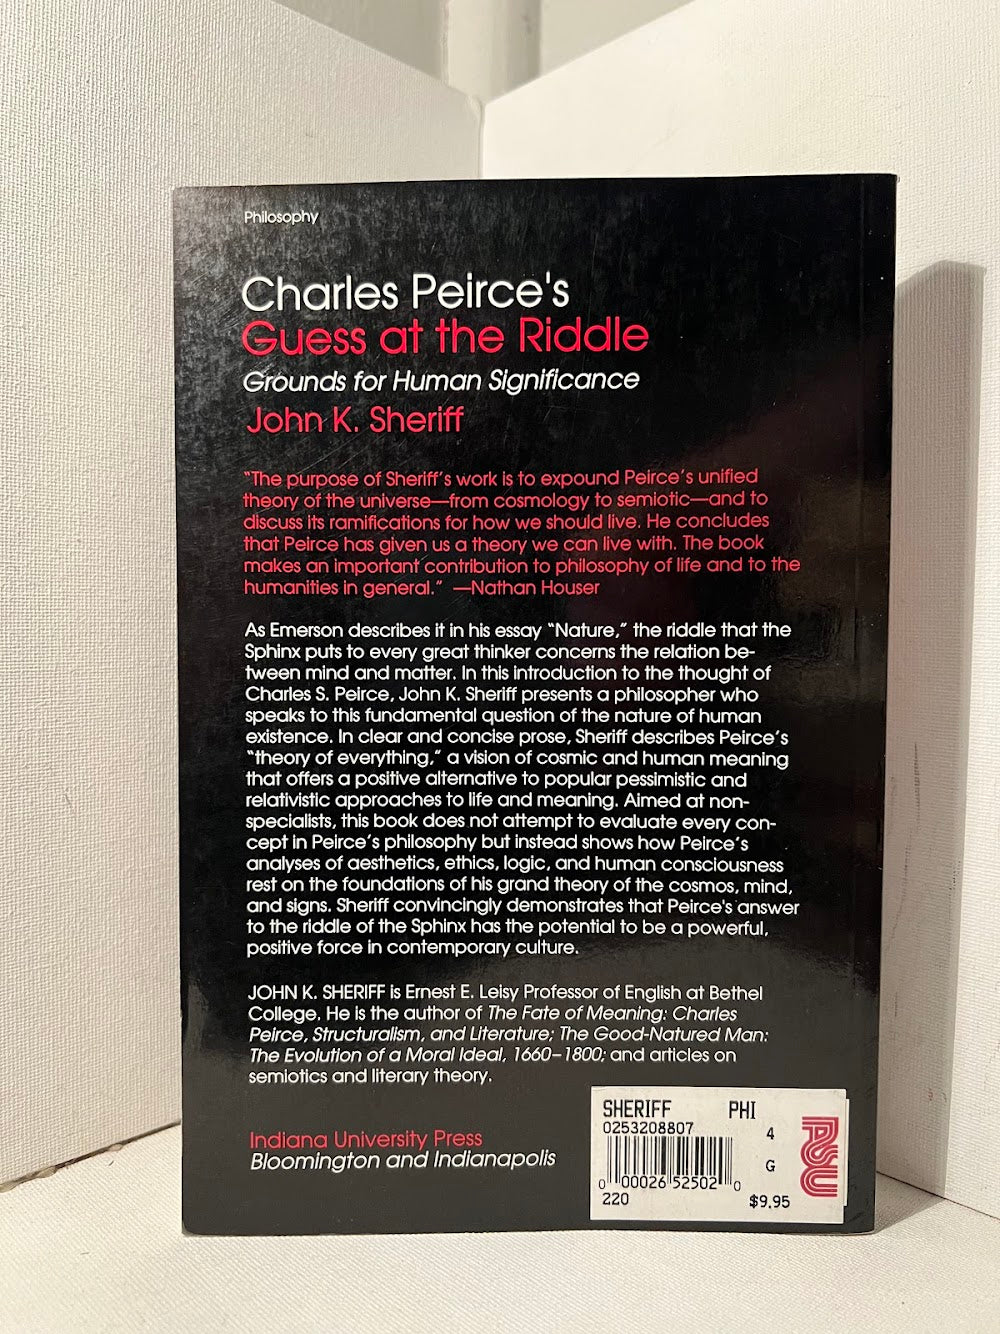 Charles Peirce's Guess at the Riddle by John K. Sheriff